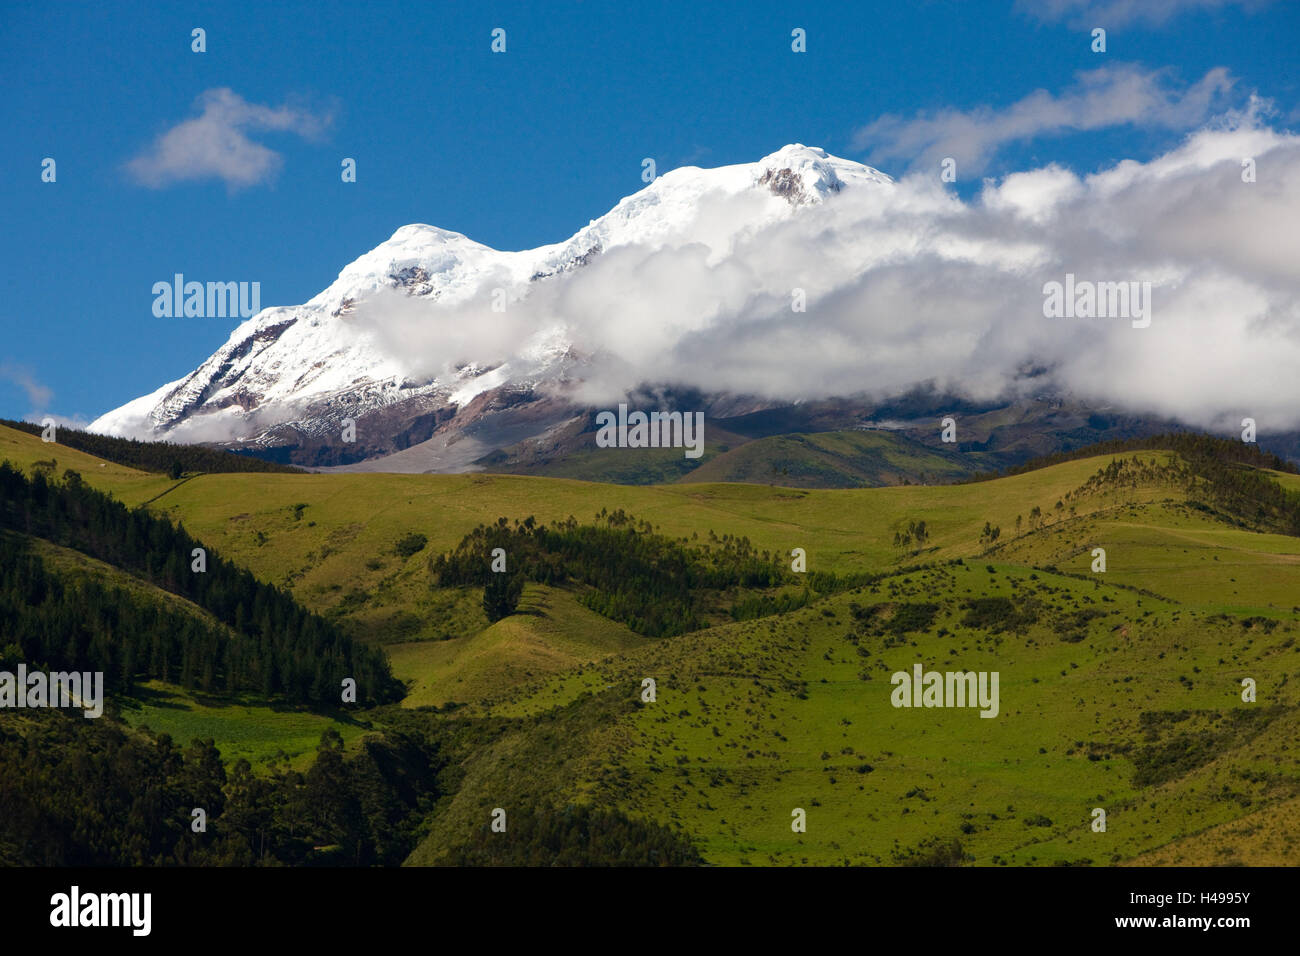 Ecuador, province Pichincha, scenery, mountains, volcano Cayambe, snowy, South America, mountain landscape, Pichincha, hill, green, mountain region, mountains, the Andes, Andes region, plateau, mountaintop, volcano summit, Cayambe, clouds, snow, Stock Photo